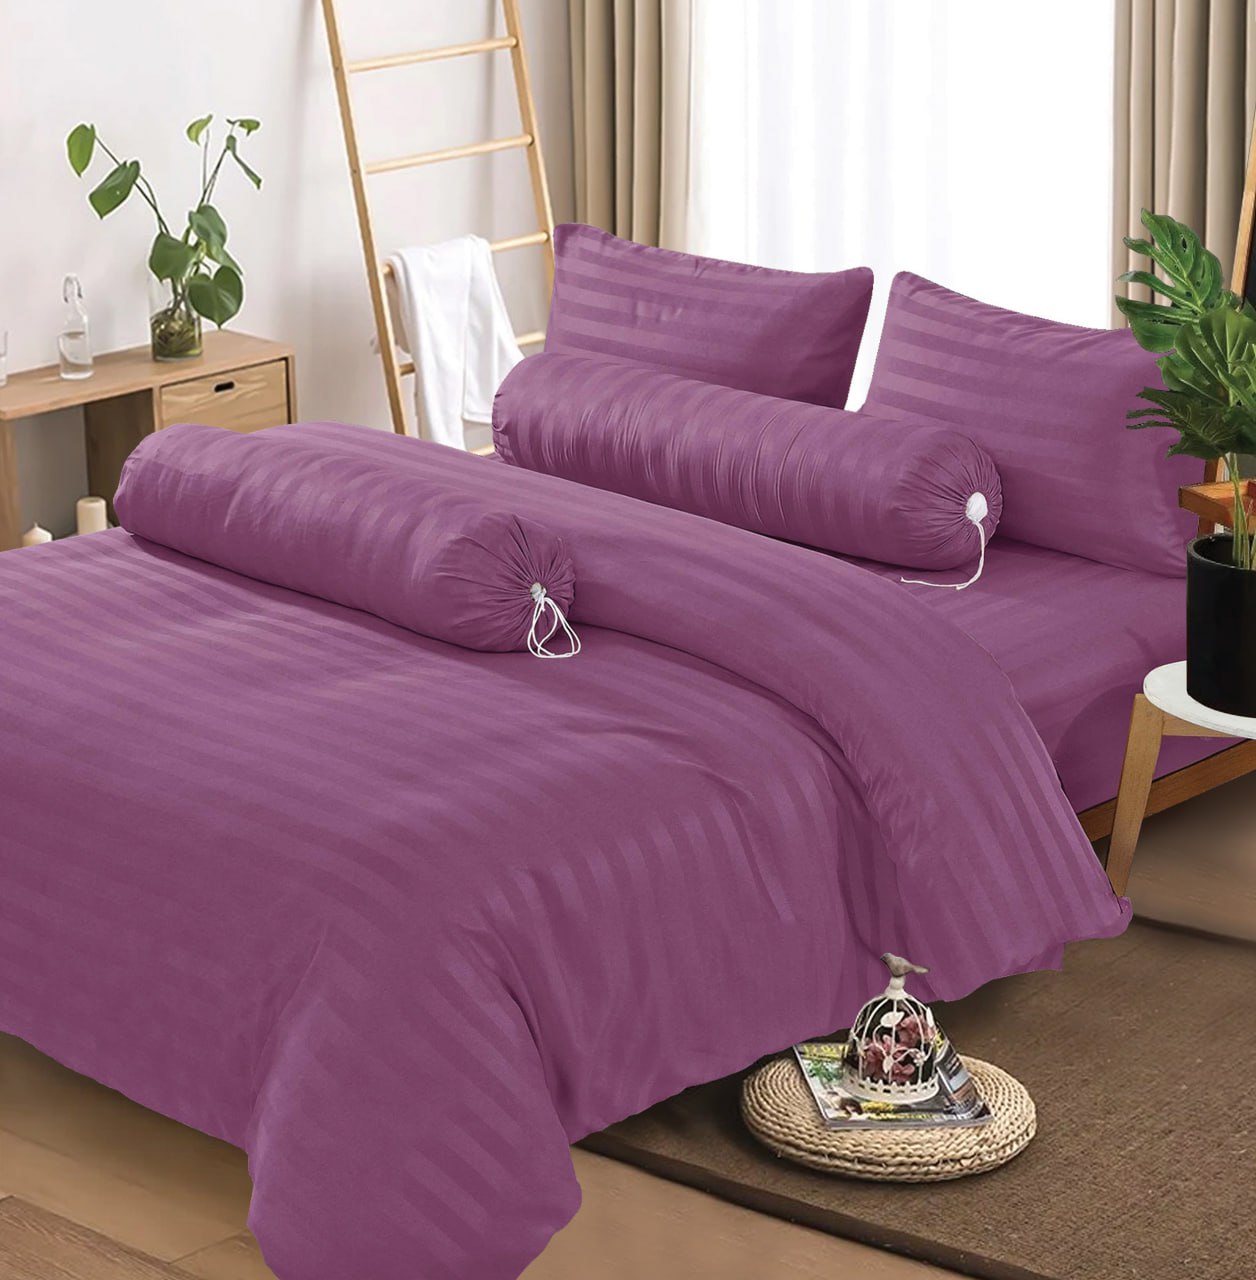 Microtex King Bedding Set with Pillow & Bolster Case